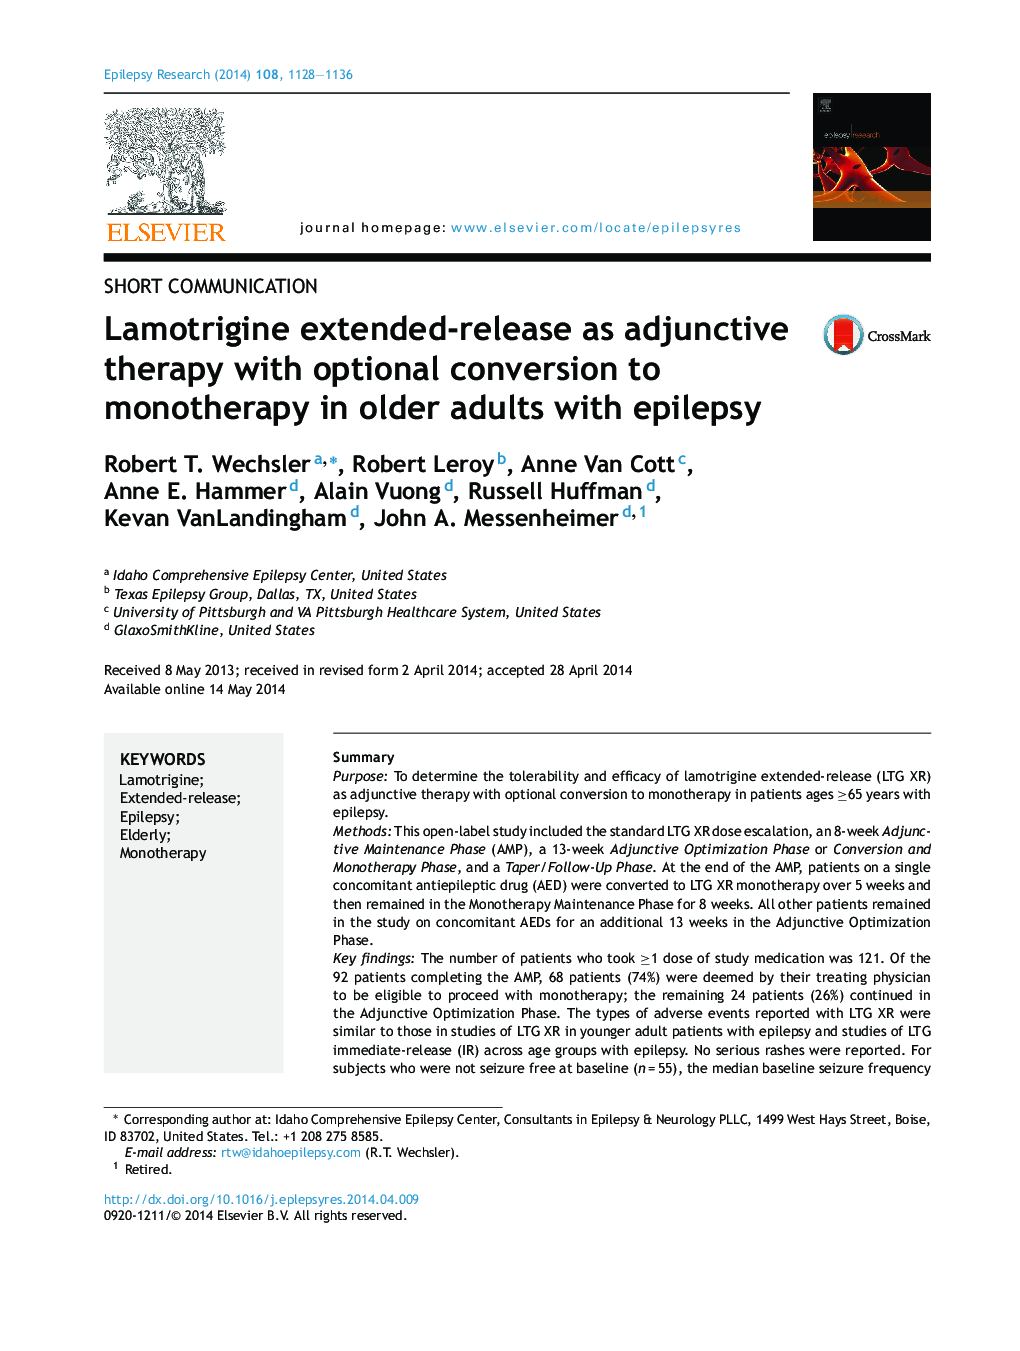 Lamotrigine extended-release as adjunctive therapy with optional conversion to monotherapy in older adults with epilepsy